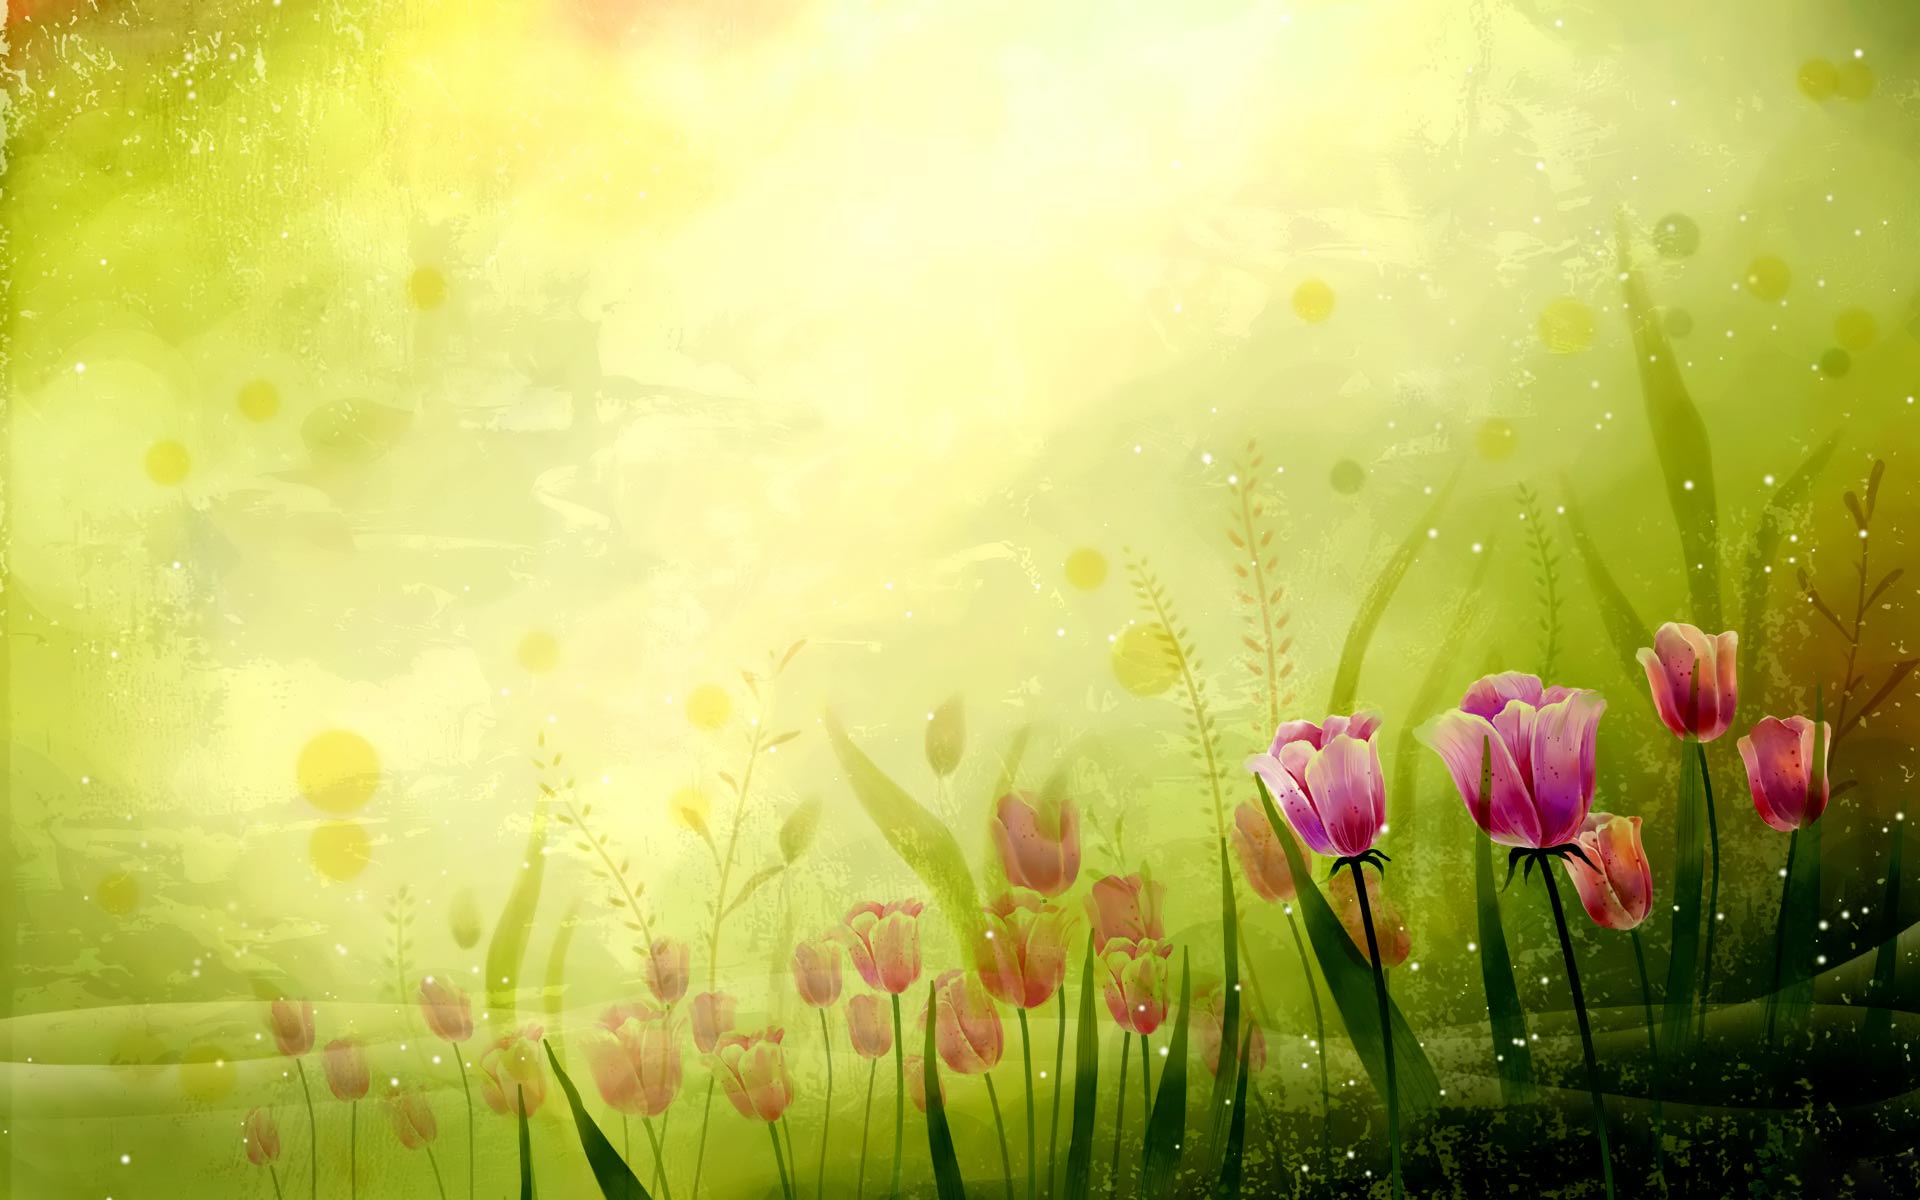  spring wallpapers category of free hd wallpapers springtime computer